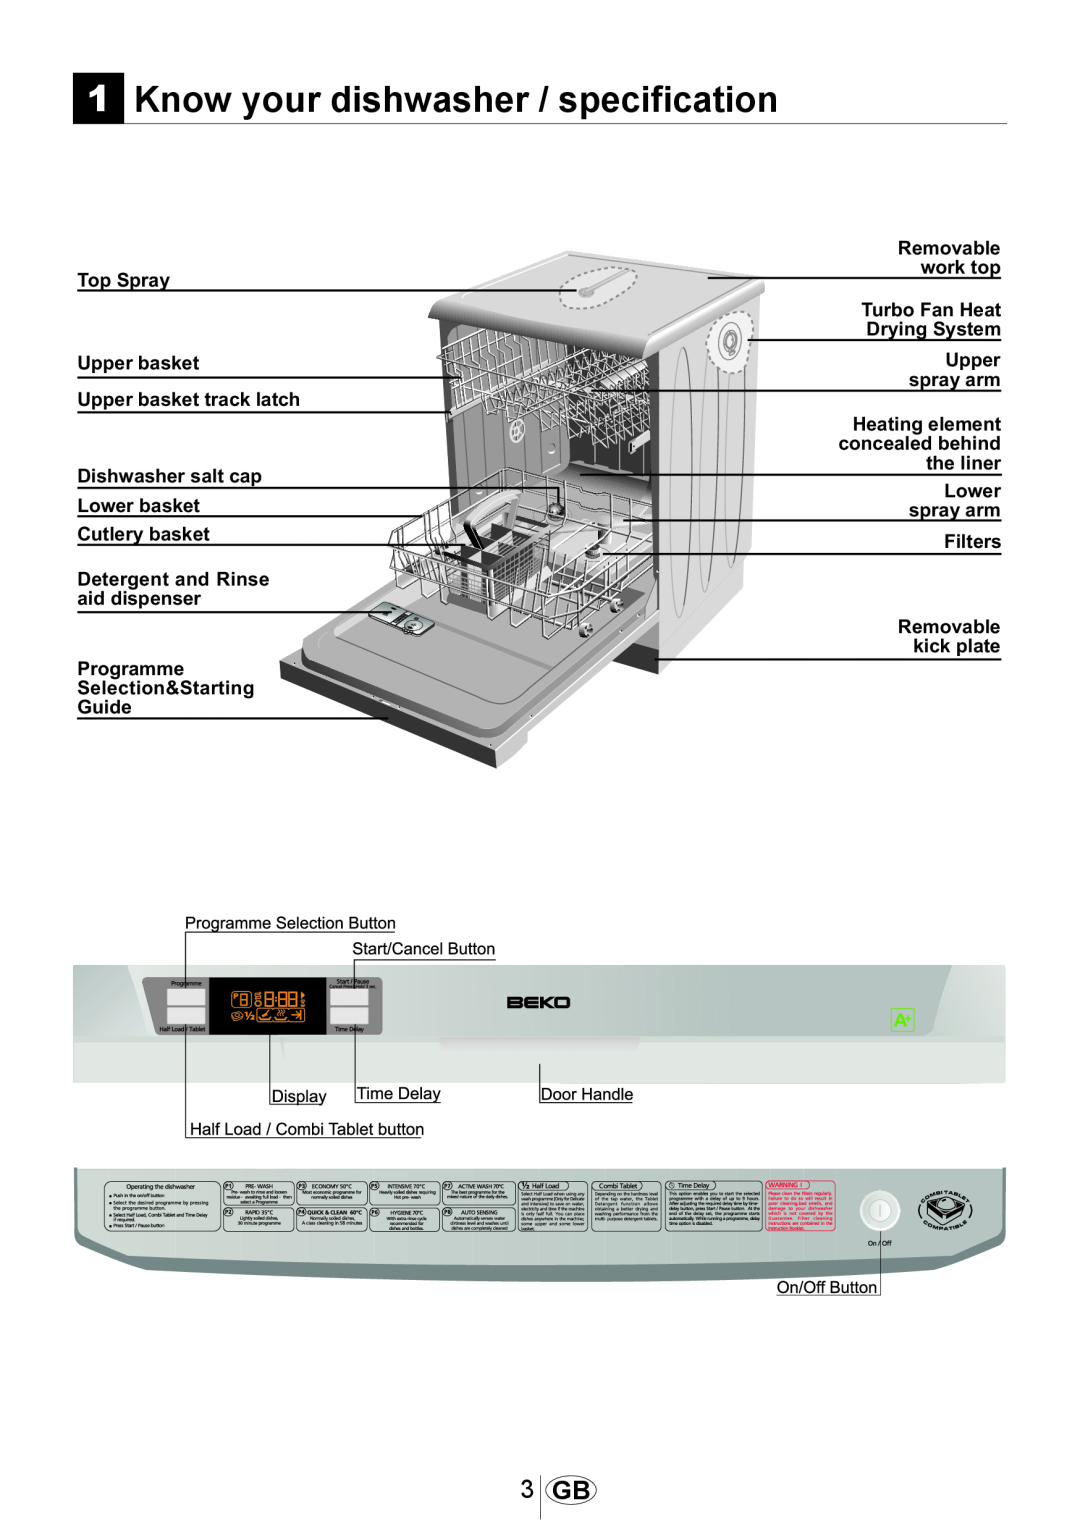 Beko DSFN 6830 manual Know your dishwasher / specification 